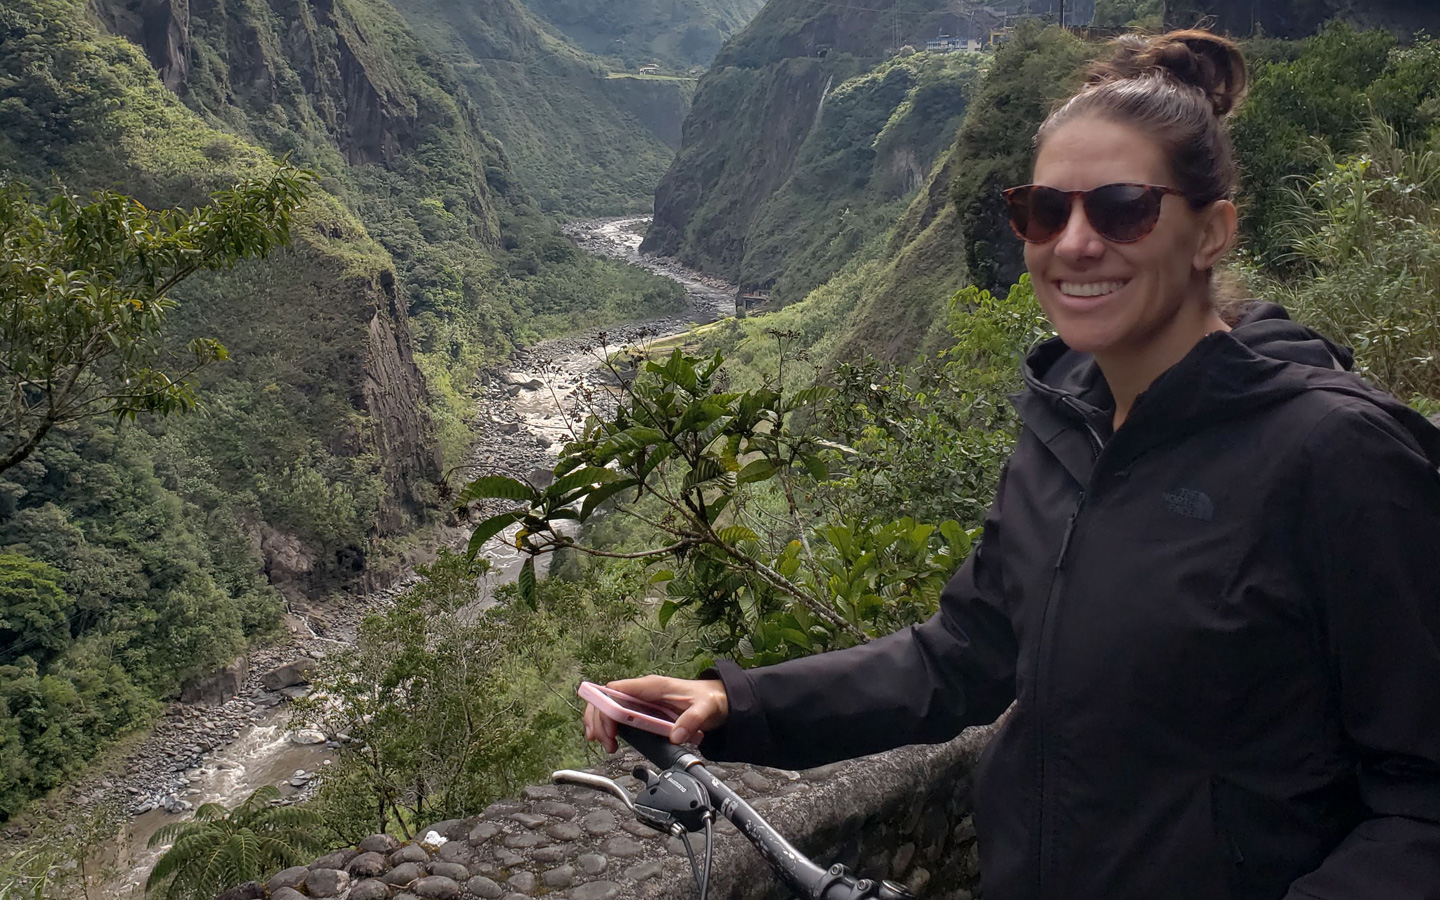 A Spanish student riding a bike with an overlook of the River